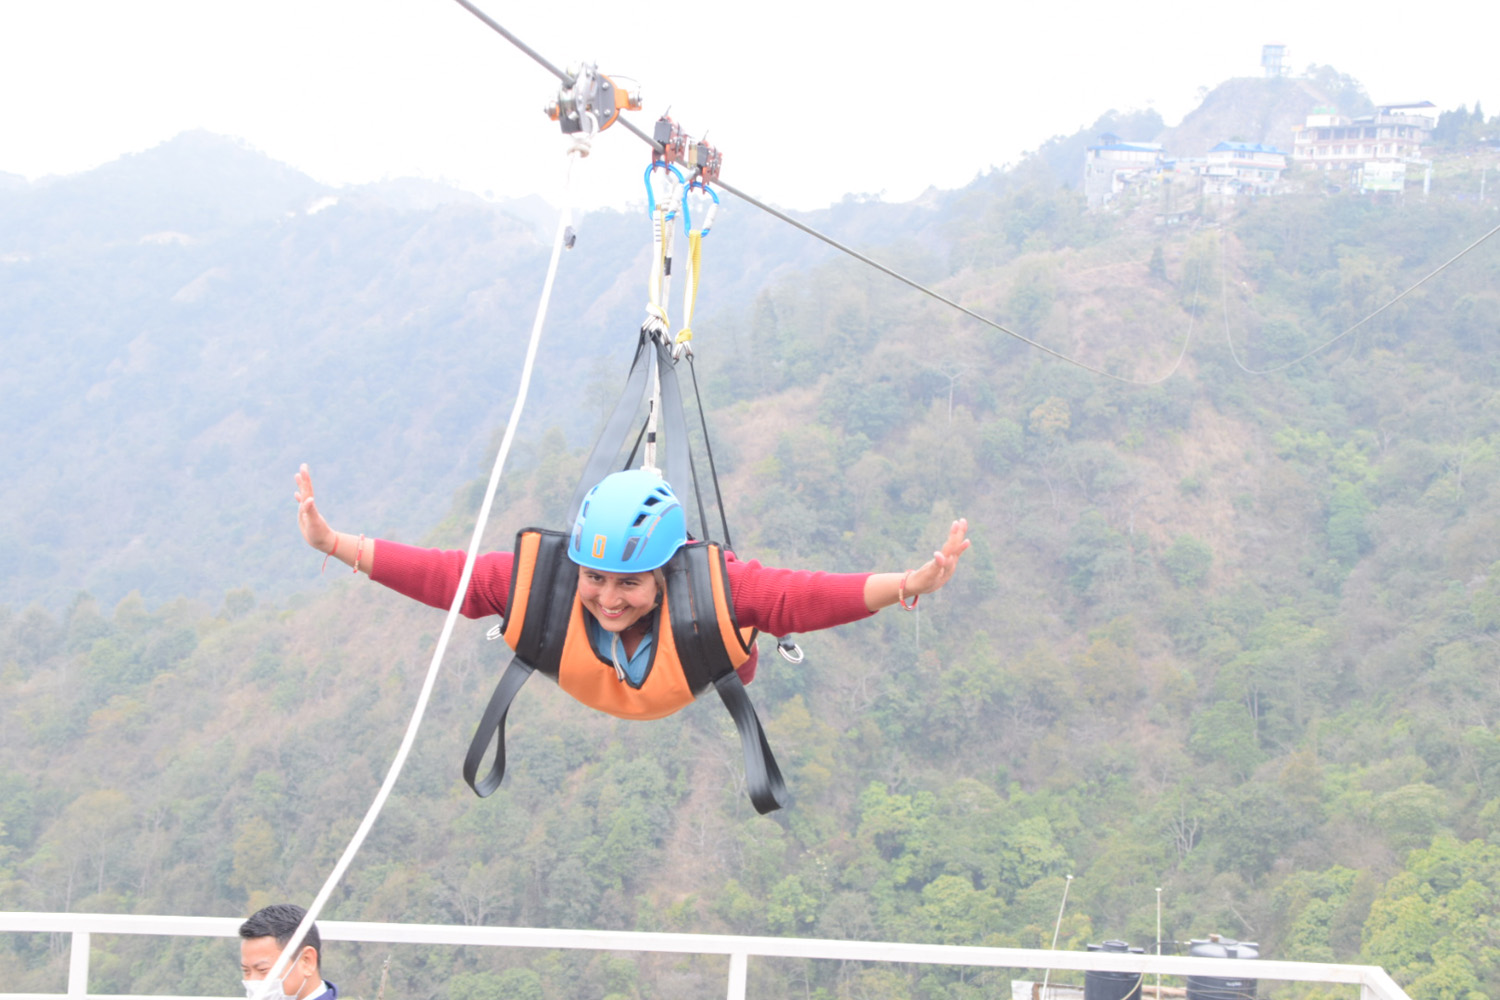 dharan-hosts-first-commercial-zip-flyer-adventure-in-state-1